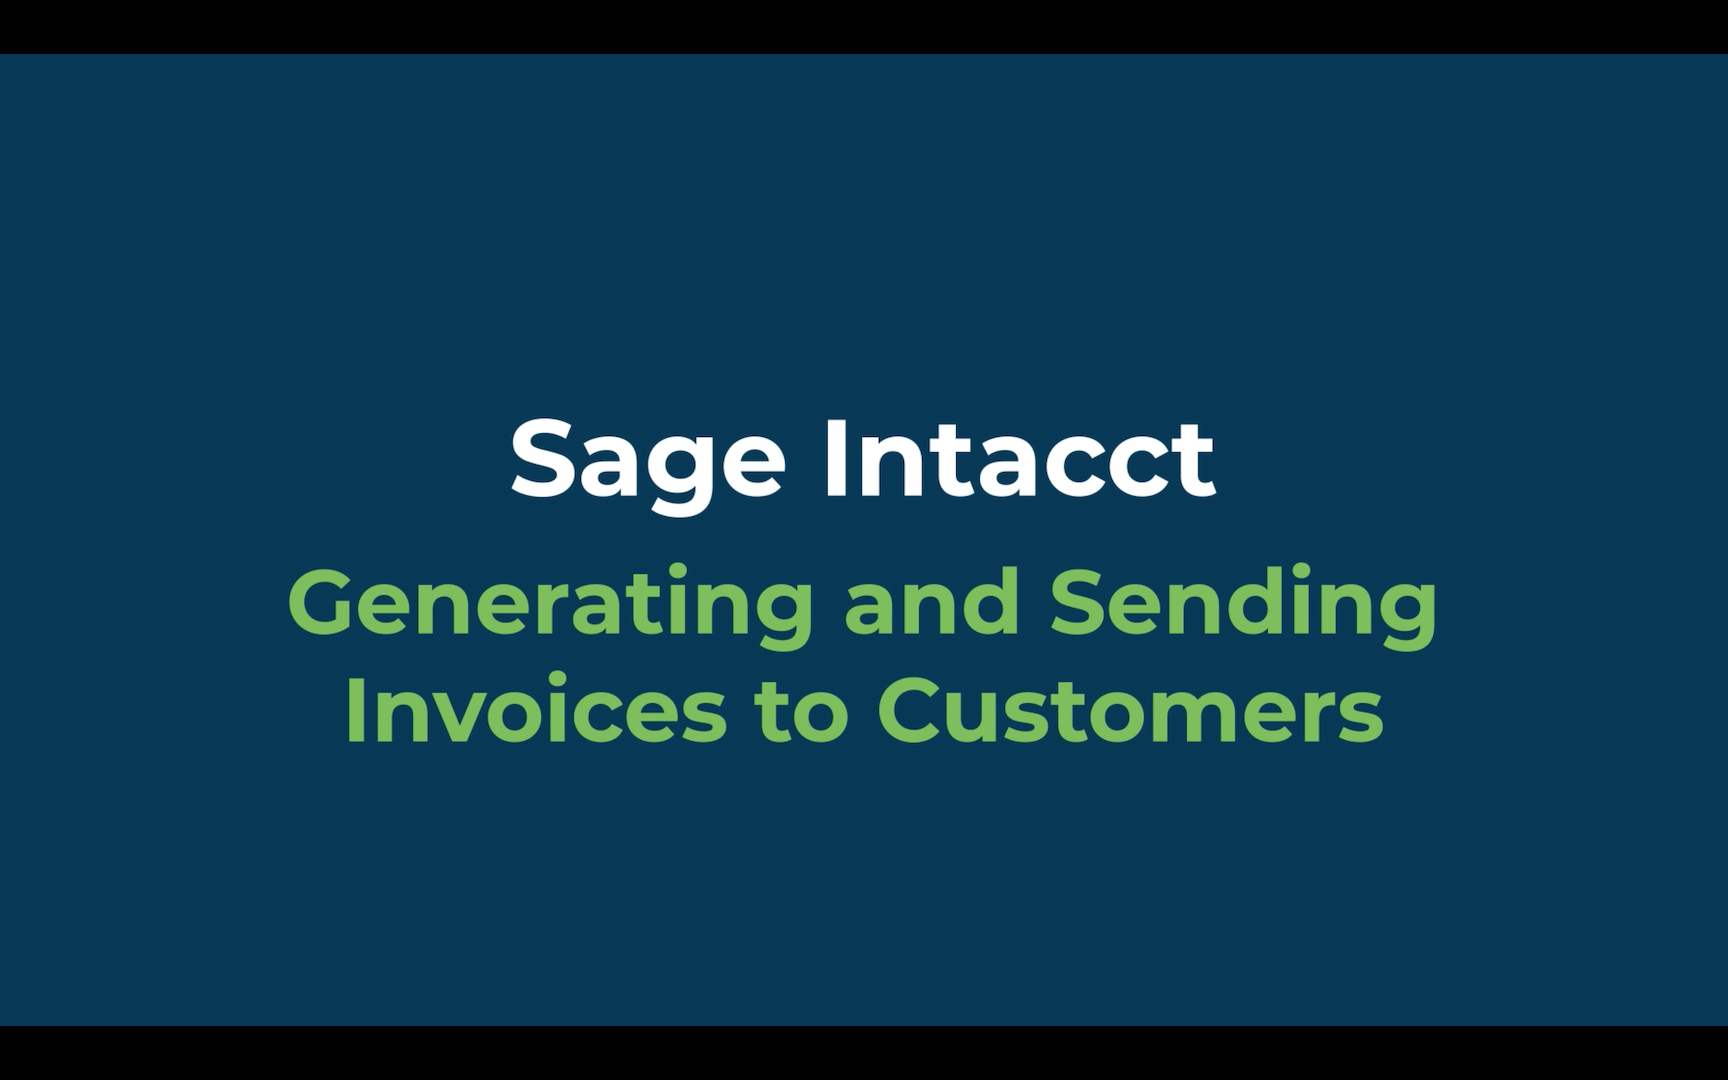 Invoices with sage intacct